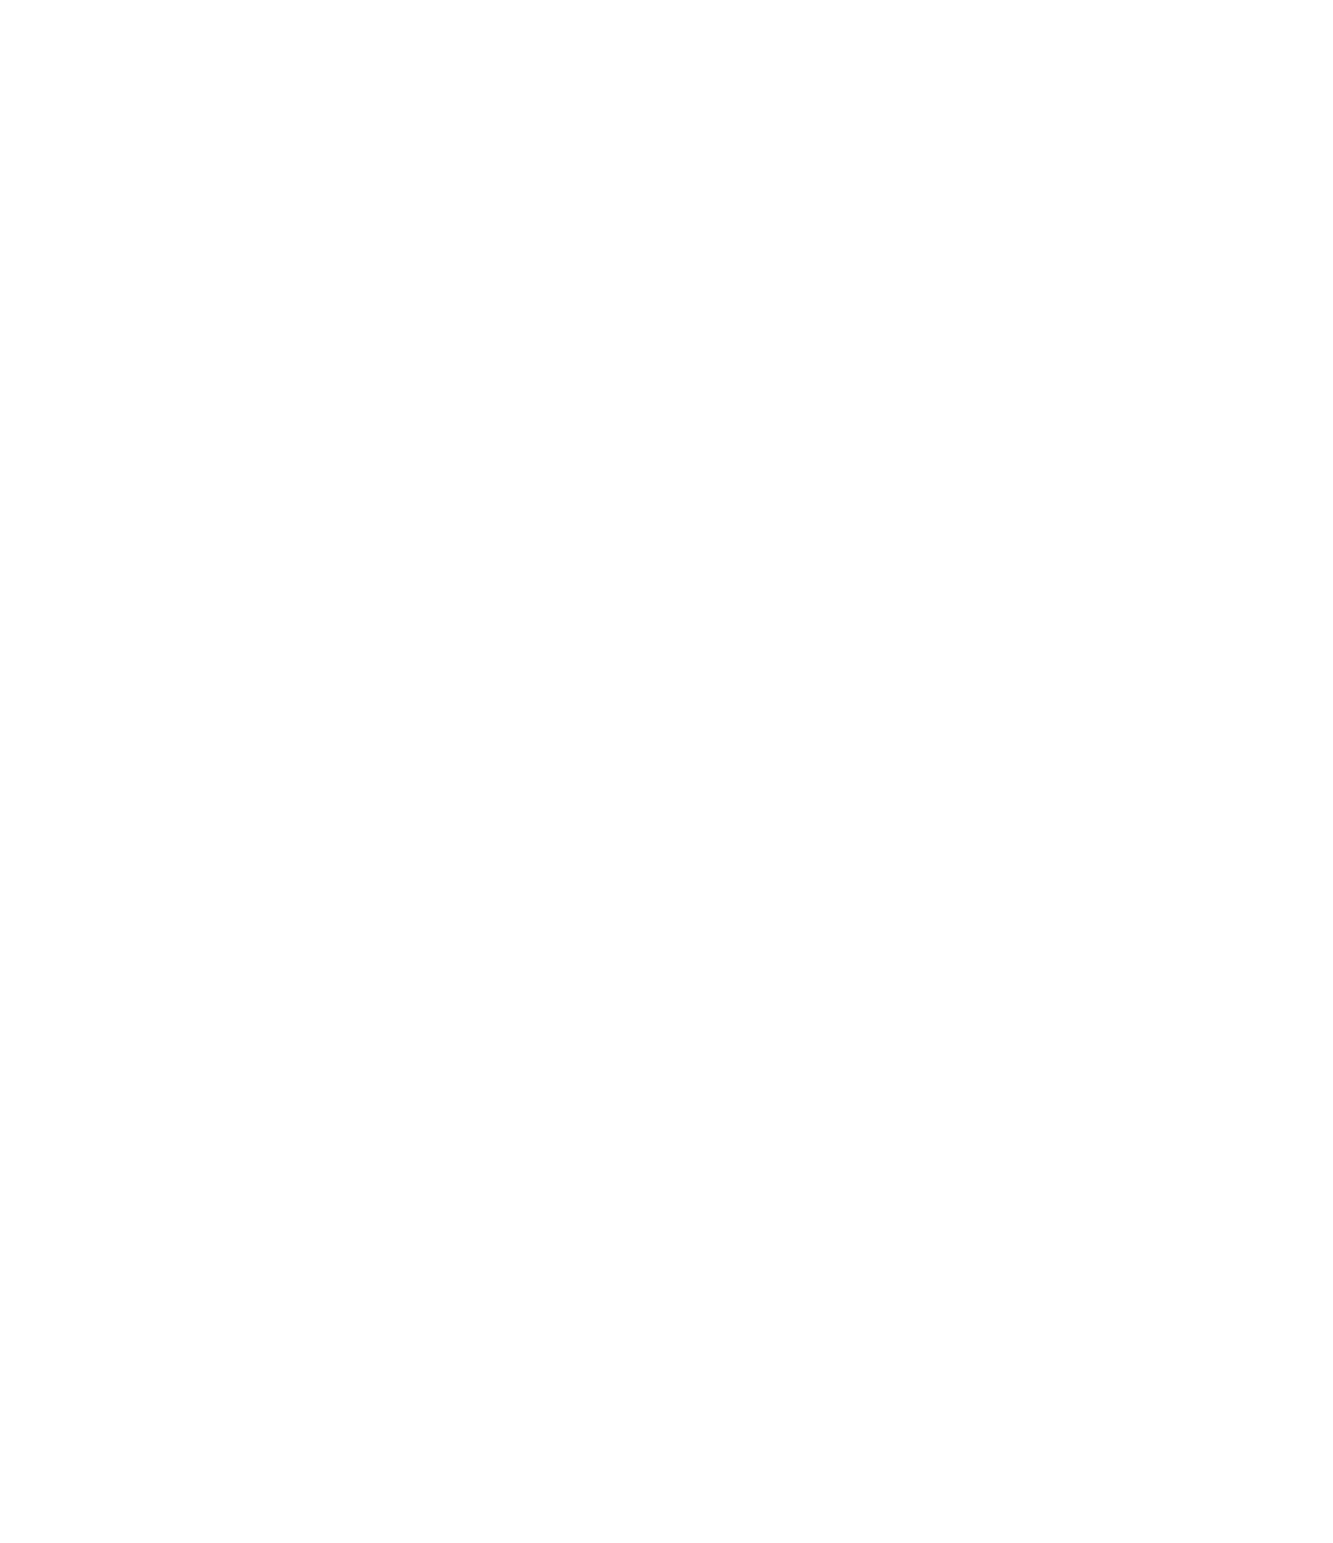 Cable One logo for dark backgrounds (transparent PNG)